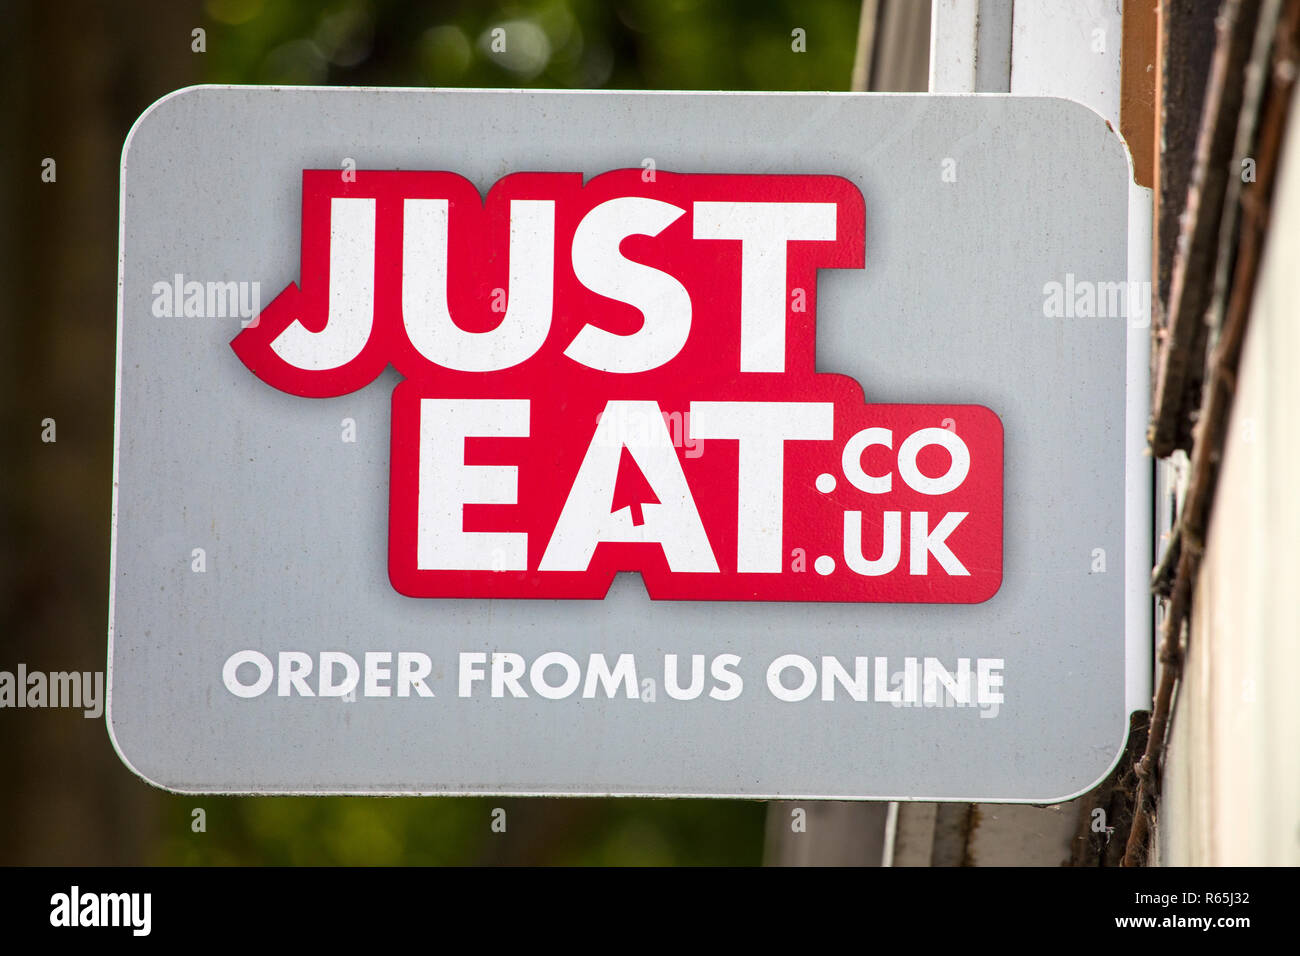 COVENTRY, UK - JULY 26TH 2018: A Just Eat sign outside a takeaway restaurant in the city of Coventry, UK, on 26th July 2018. Stock Photo